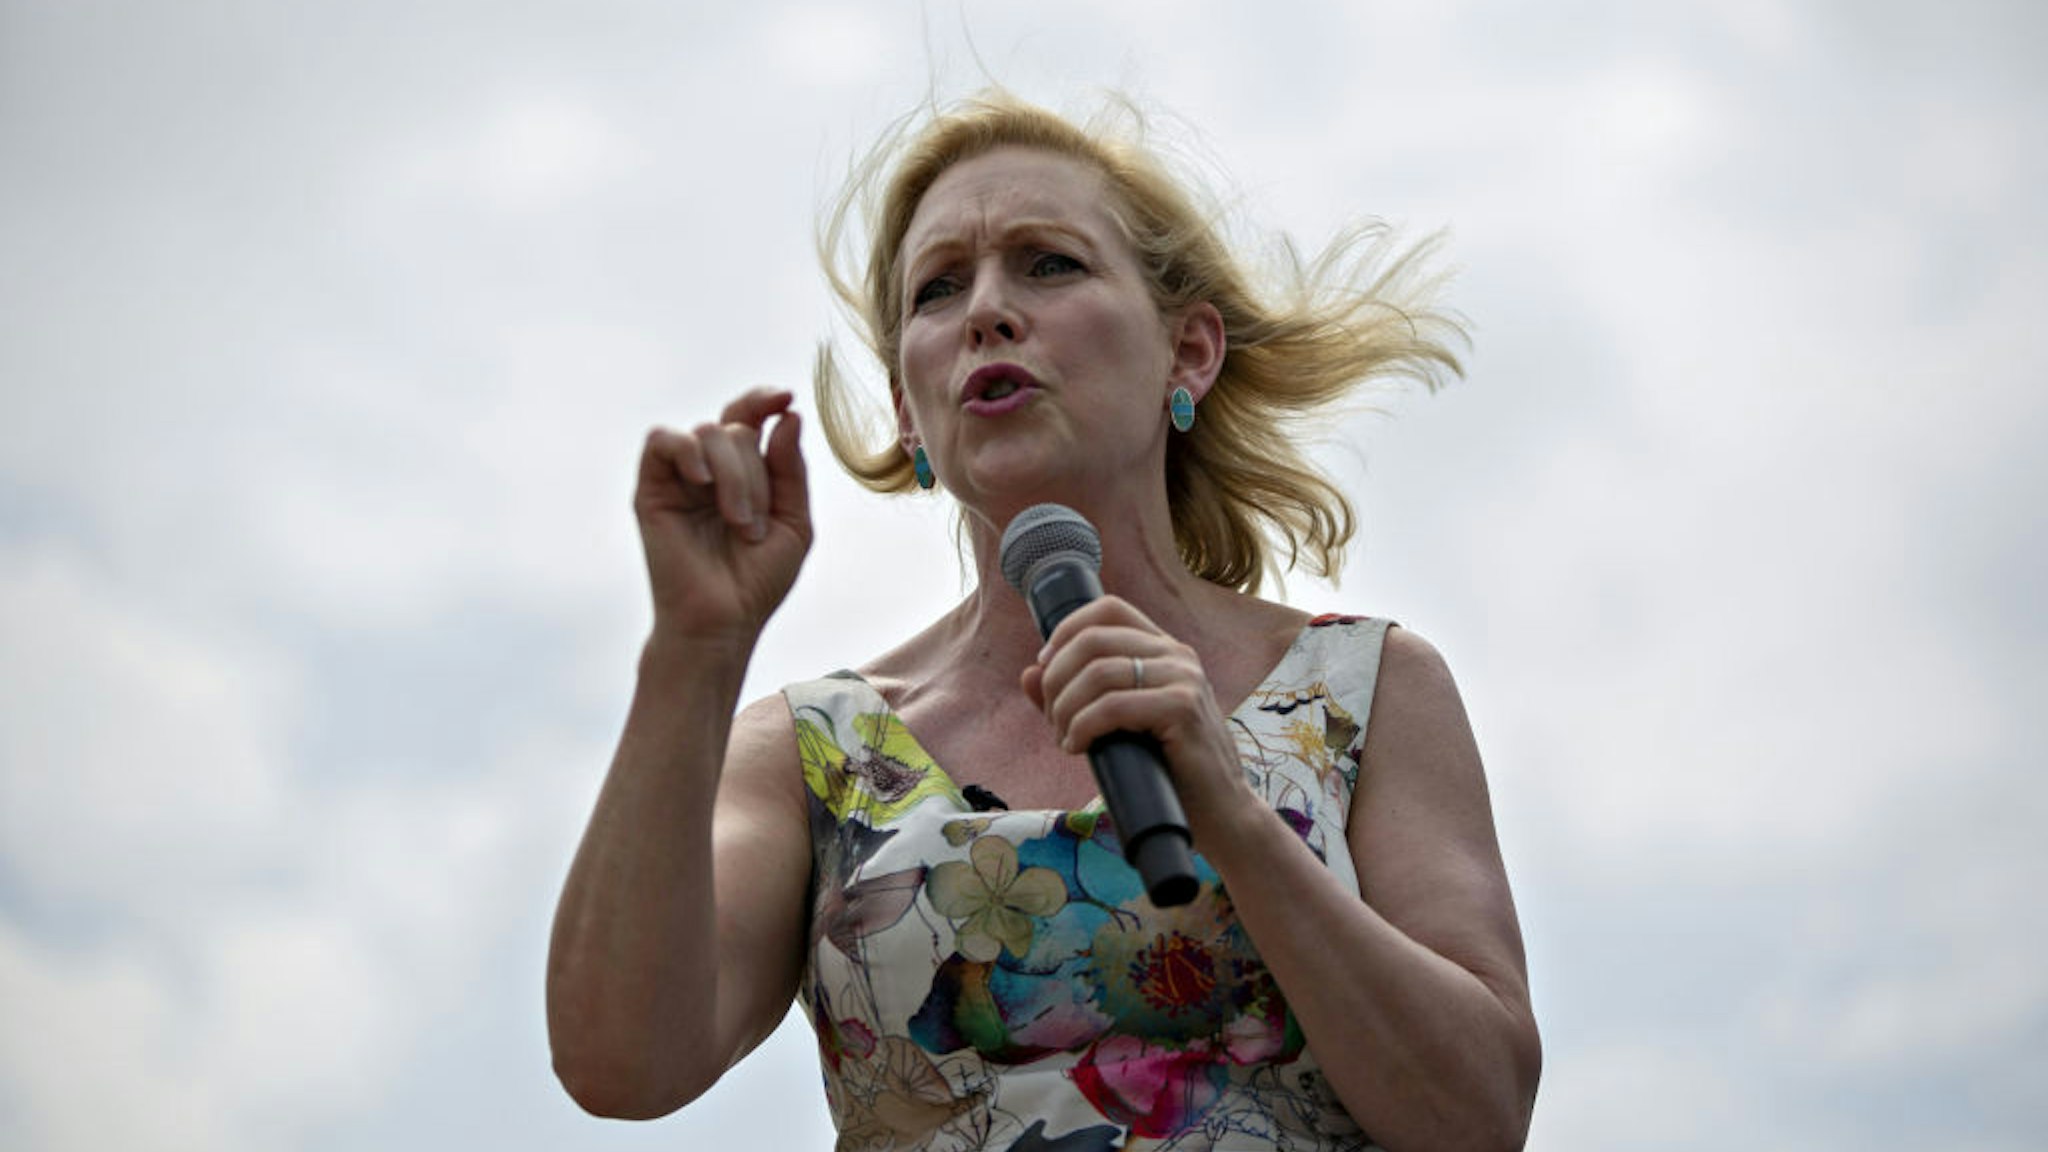 Senator Kirsten Gillibrand, a Democrat from New York and 2020 presidential candidate, speaks at the Des Moines Register Soapbox during the Iowa State Fair in Des Moines, Iowa, U.S., on Saturday, Aug. 10, 2019. The 2020 Democratic field is gathering in Iowa for the showcase Iowa State Fair, a chance for candidates to meet with voters in the first primary contest of the presidential campaign -- and eat fattening food and view butter sculptures.